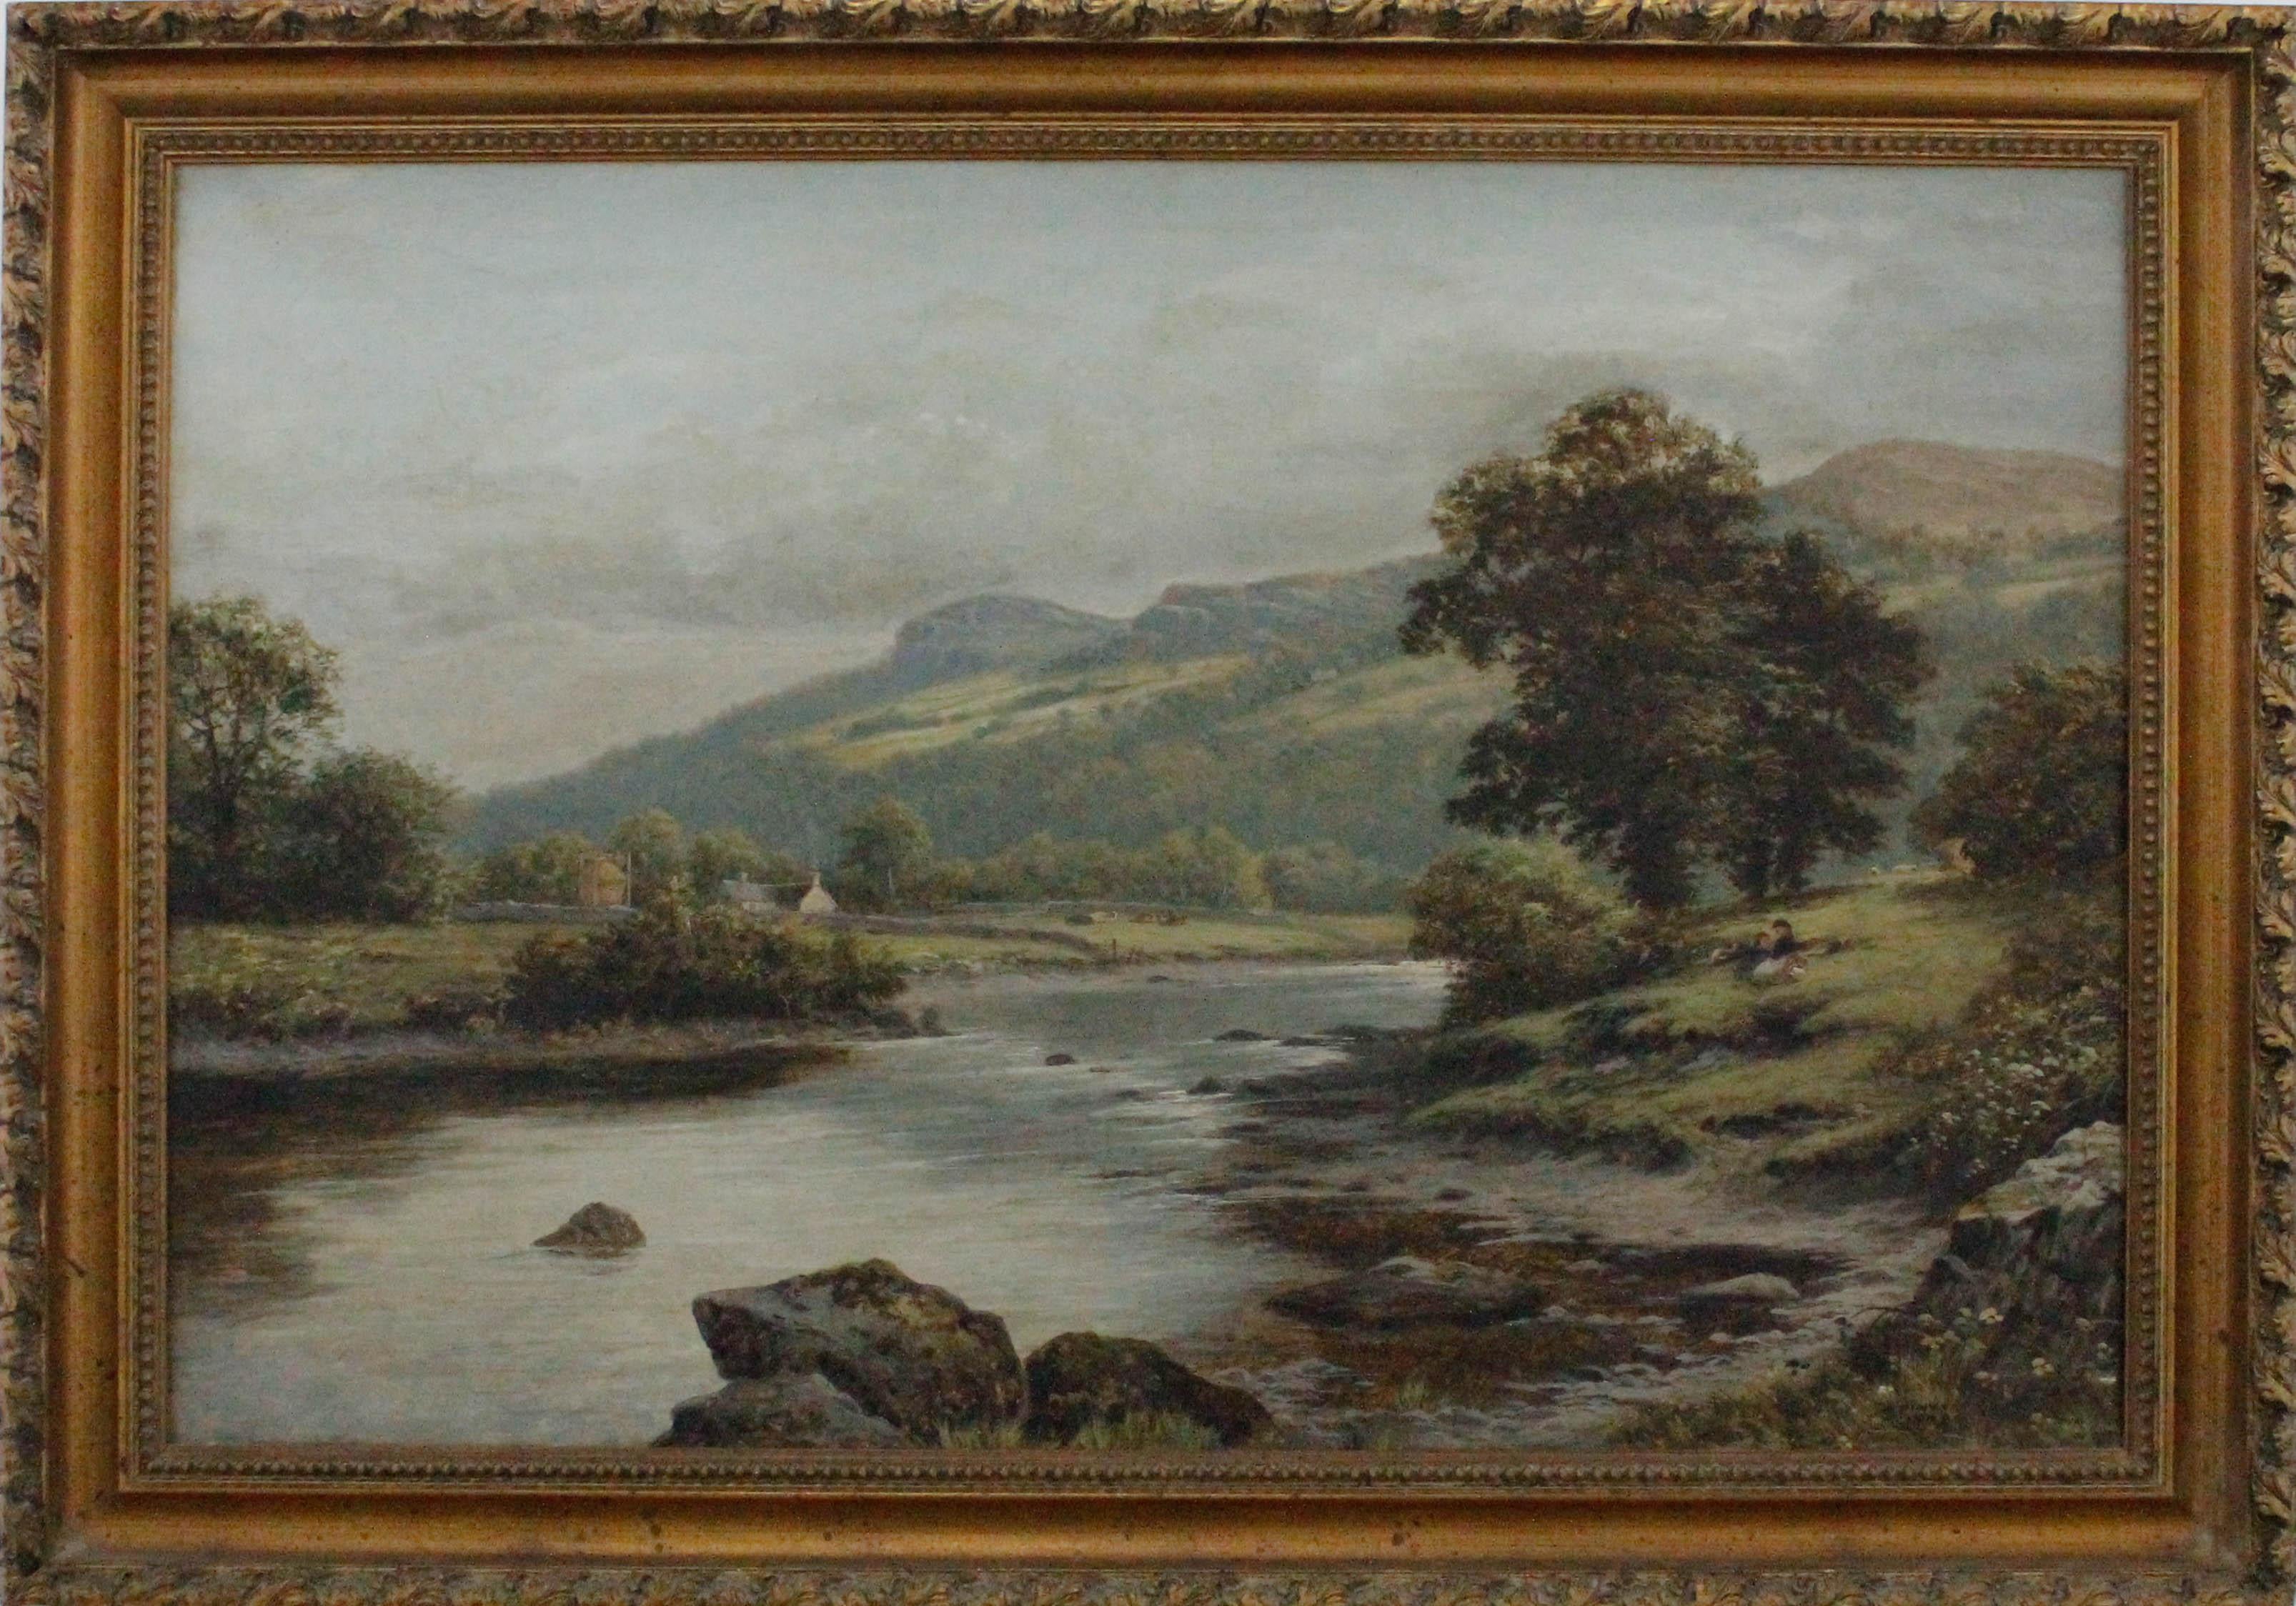 A verdant 19th Century landscape showing a winding river sparkling in the summer sun. Two young girls sit in the grass on the bank to the right and cattle graze in pastures in the distance with the valley rising up into the lush green hillside. The